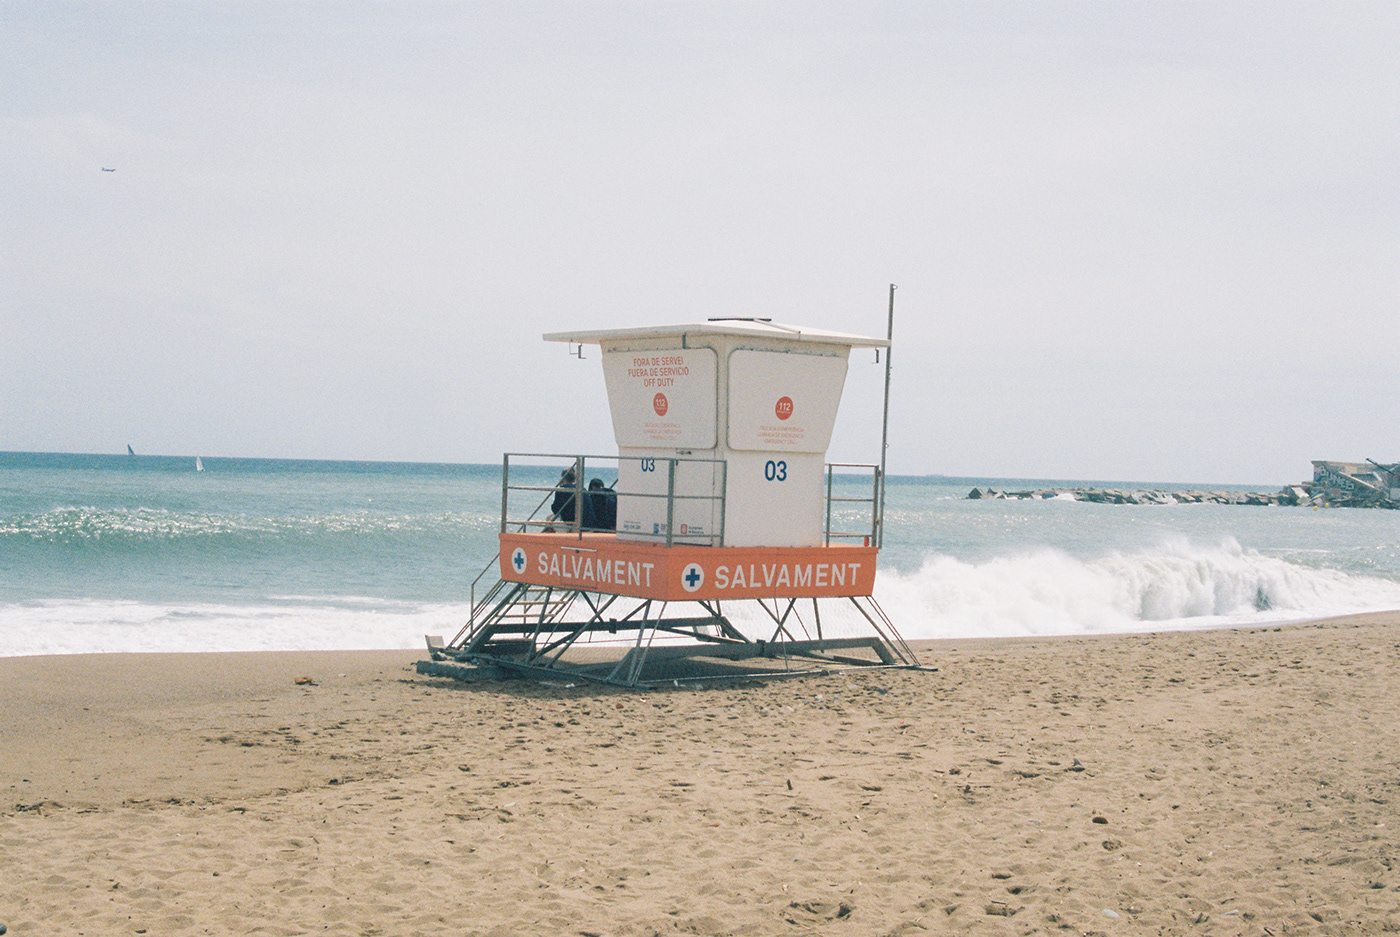 35mm 35mm film 35mm Photography analog analog photography argentique beach Photography  summer barcelona